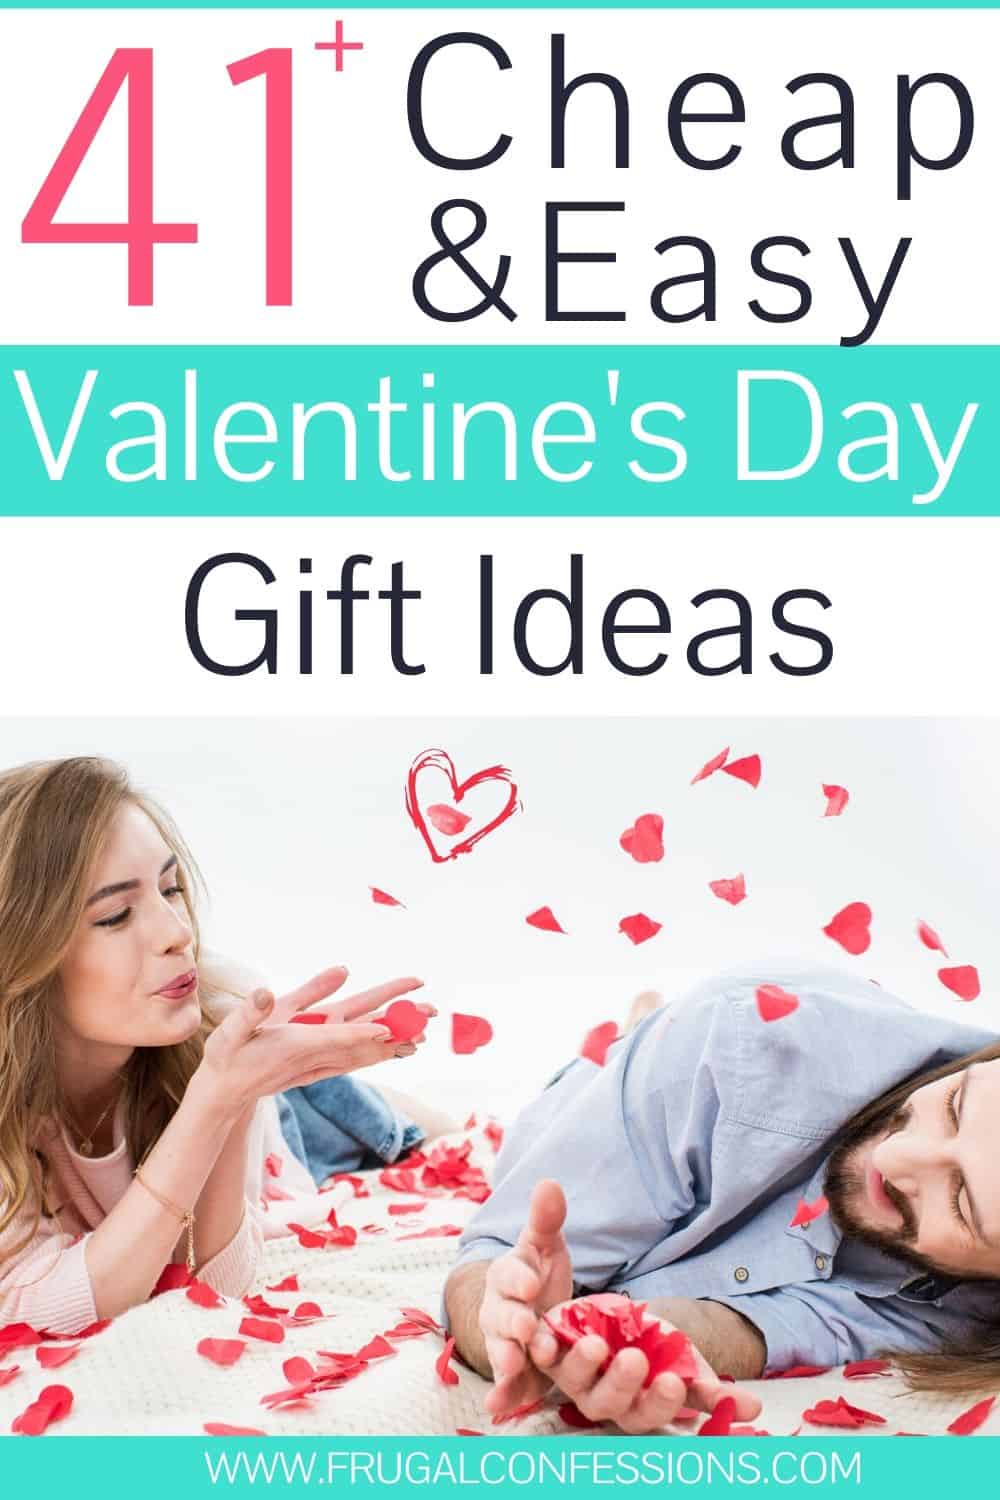 couple playing with rose petals, text overlay "41 cheap and easy Valentine's Day Gift ideas"